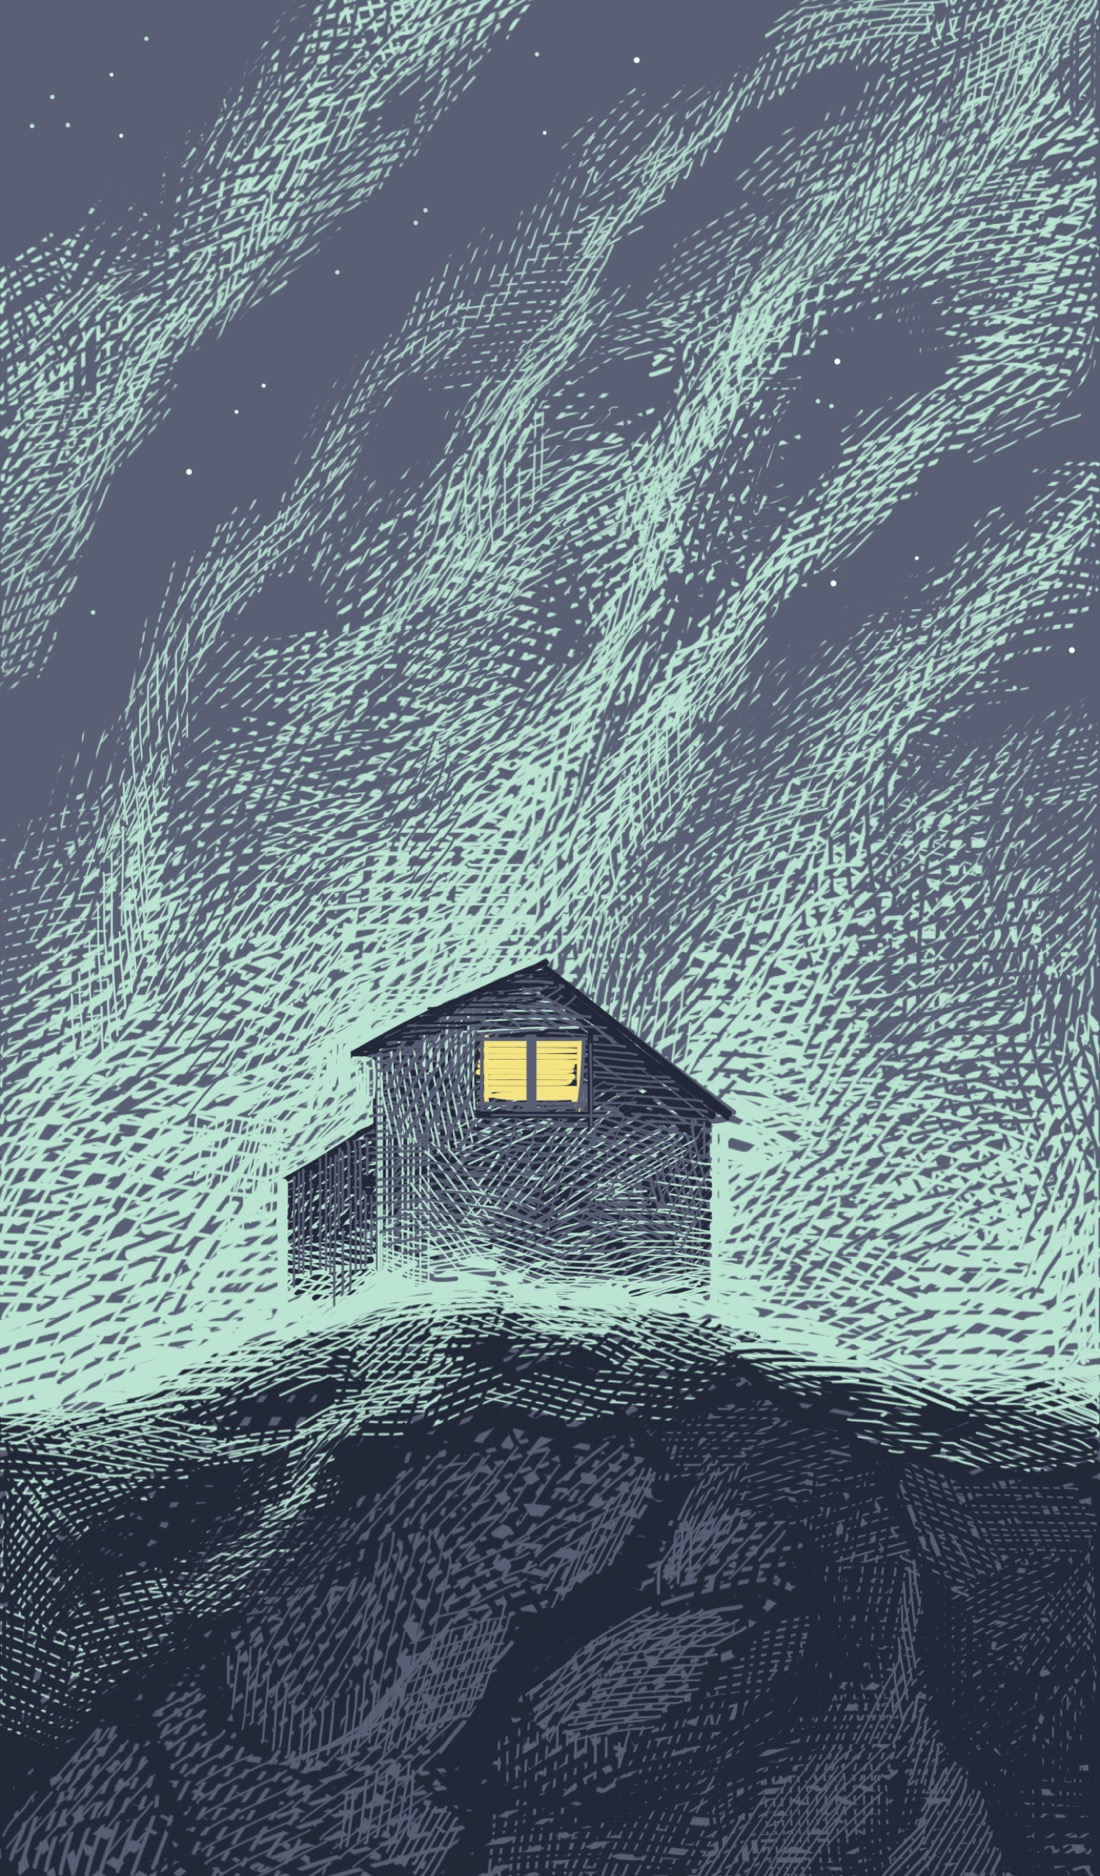 A house stands on a rocky hill at night. Behind the house, the sky is filled with billowing phosphorescent green clouds: could be fog or maybe even the aurora. Fog appears to be hanging low to the ground as well. On the second floor of the house, two windows are lit.